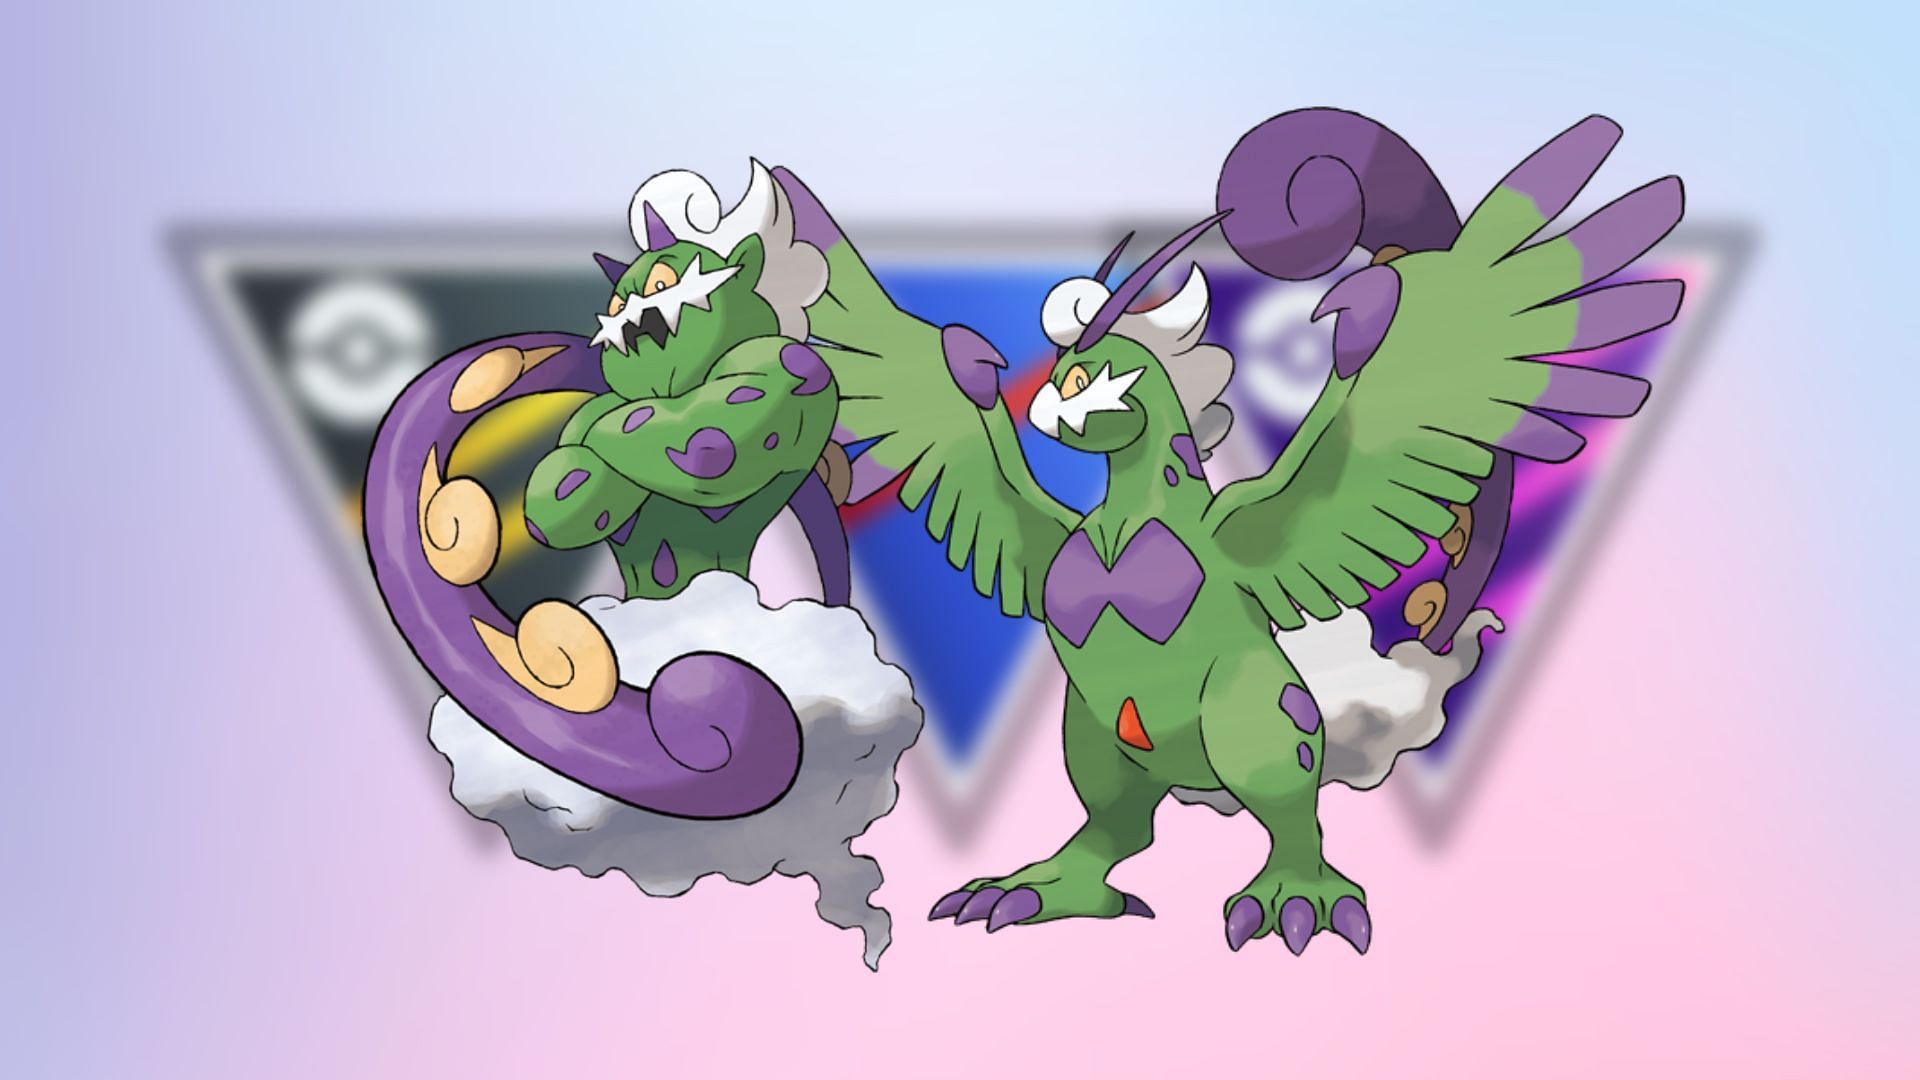 Pokemon GO Tornadus PvP and PvE guide